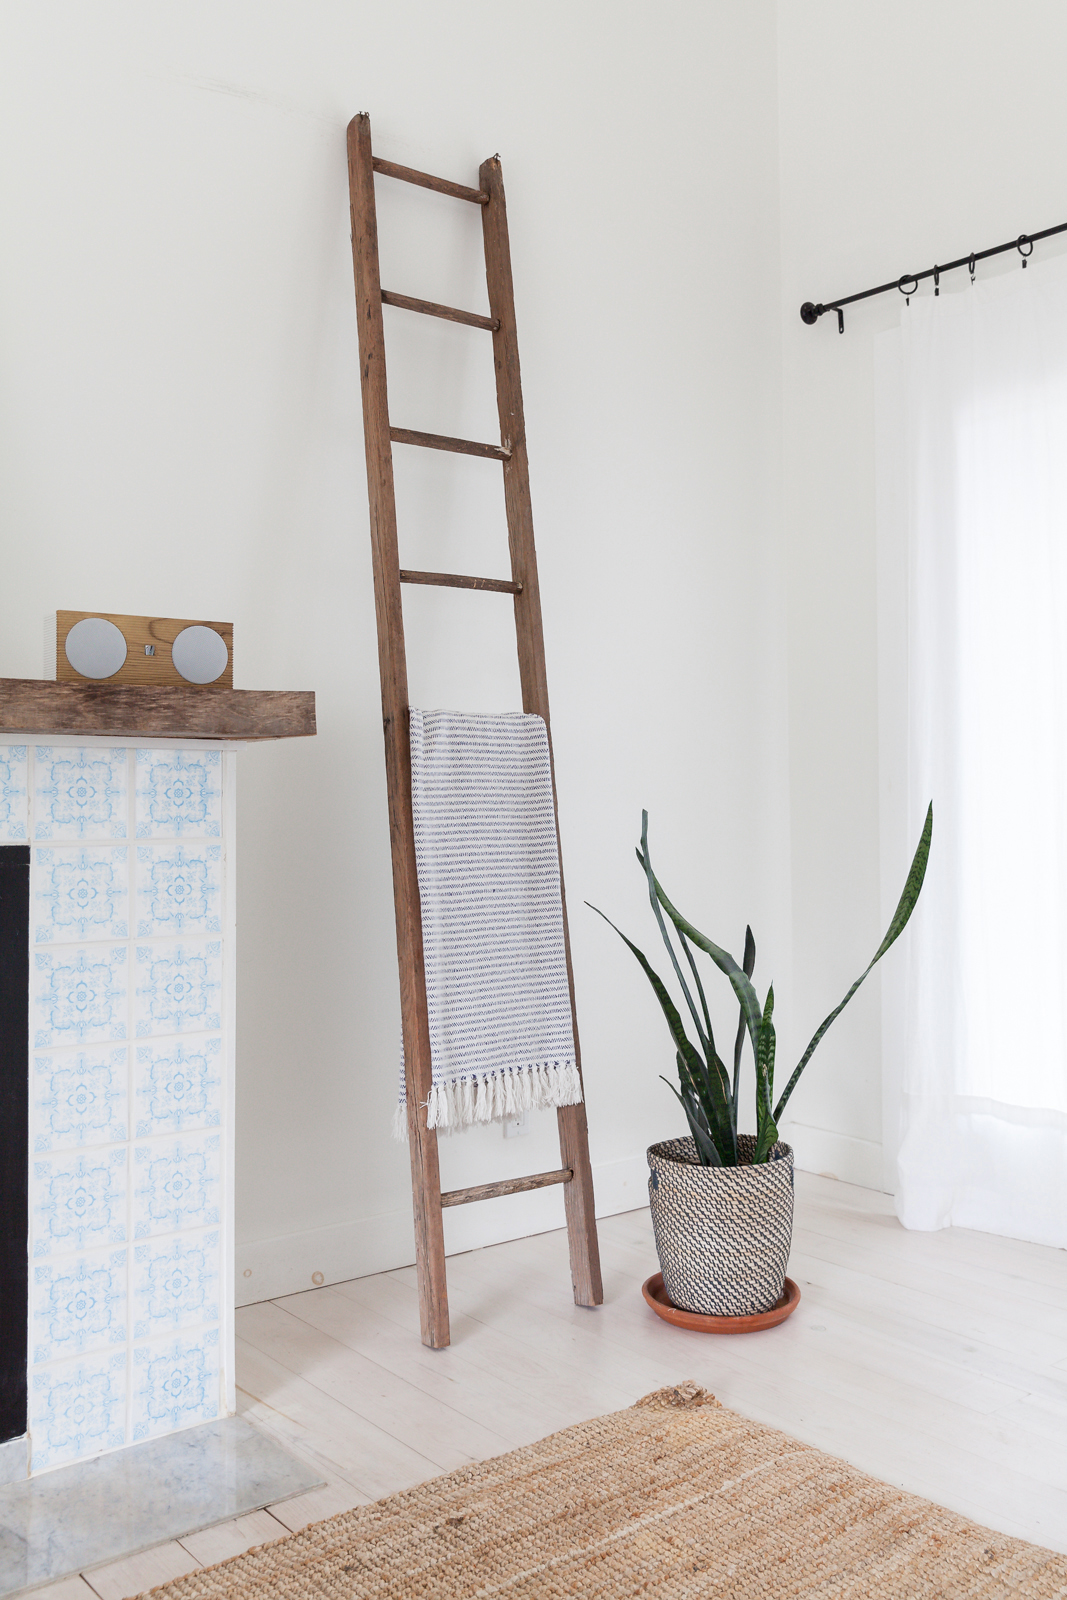 A wooden ladder leaning against the wall in the living room with a Turkish towel draped through one of the rungs